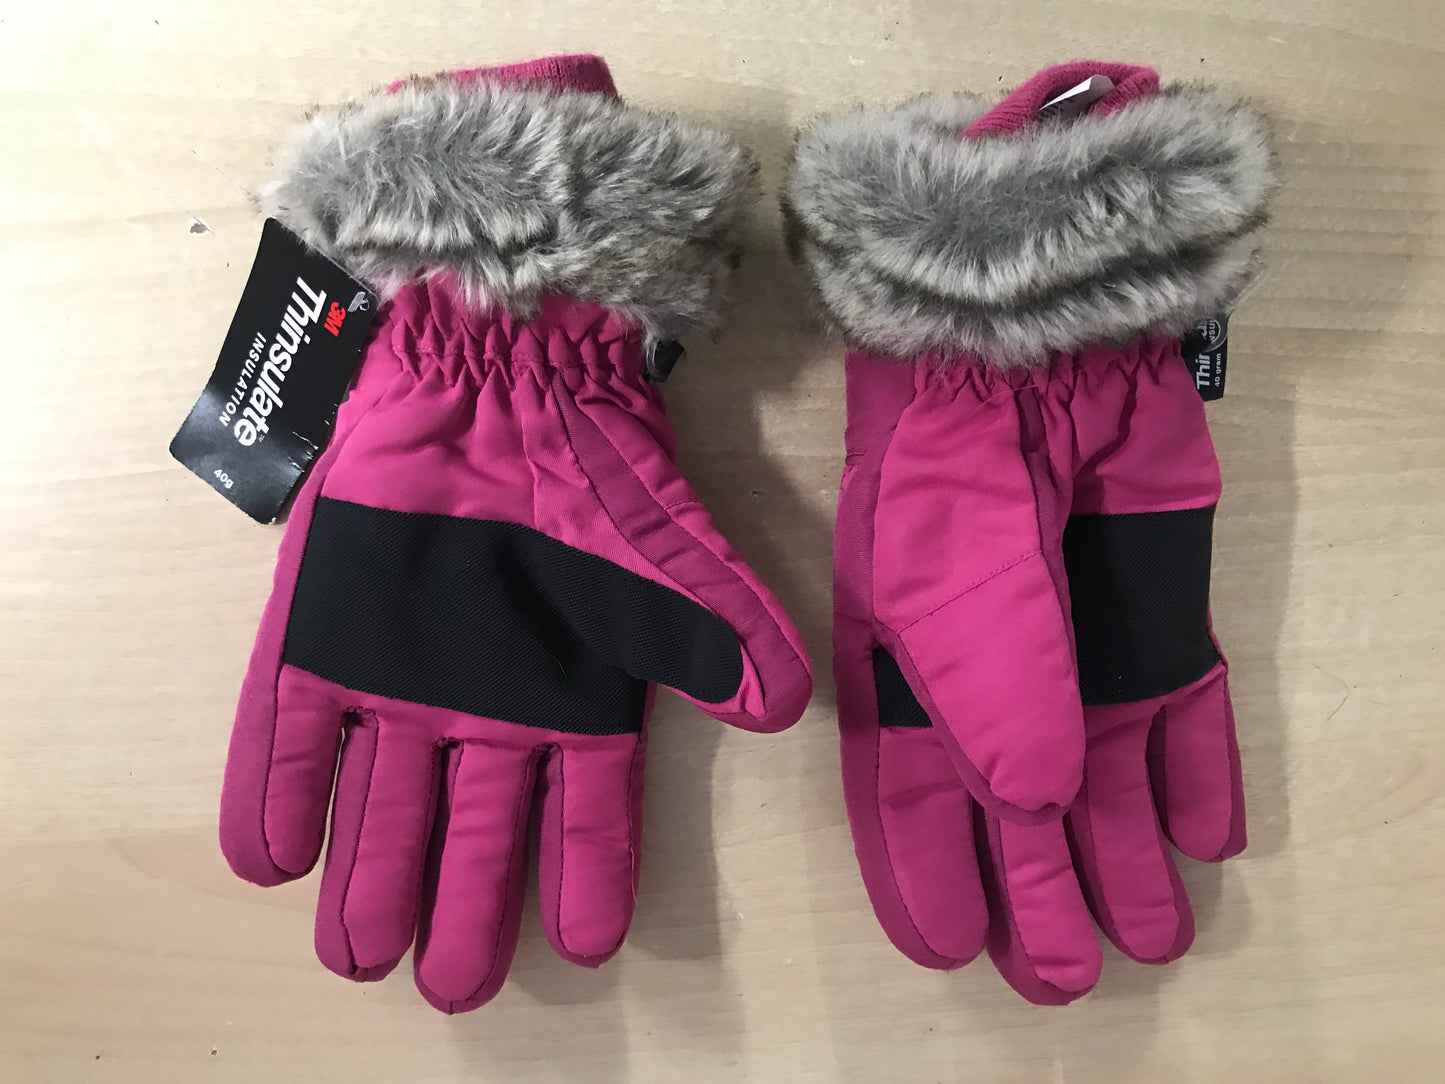 Winter Gloves and Mitts Child Size 10-12 Pink Grey With Faux Fur New With Tags